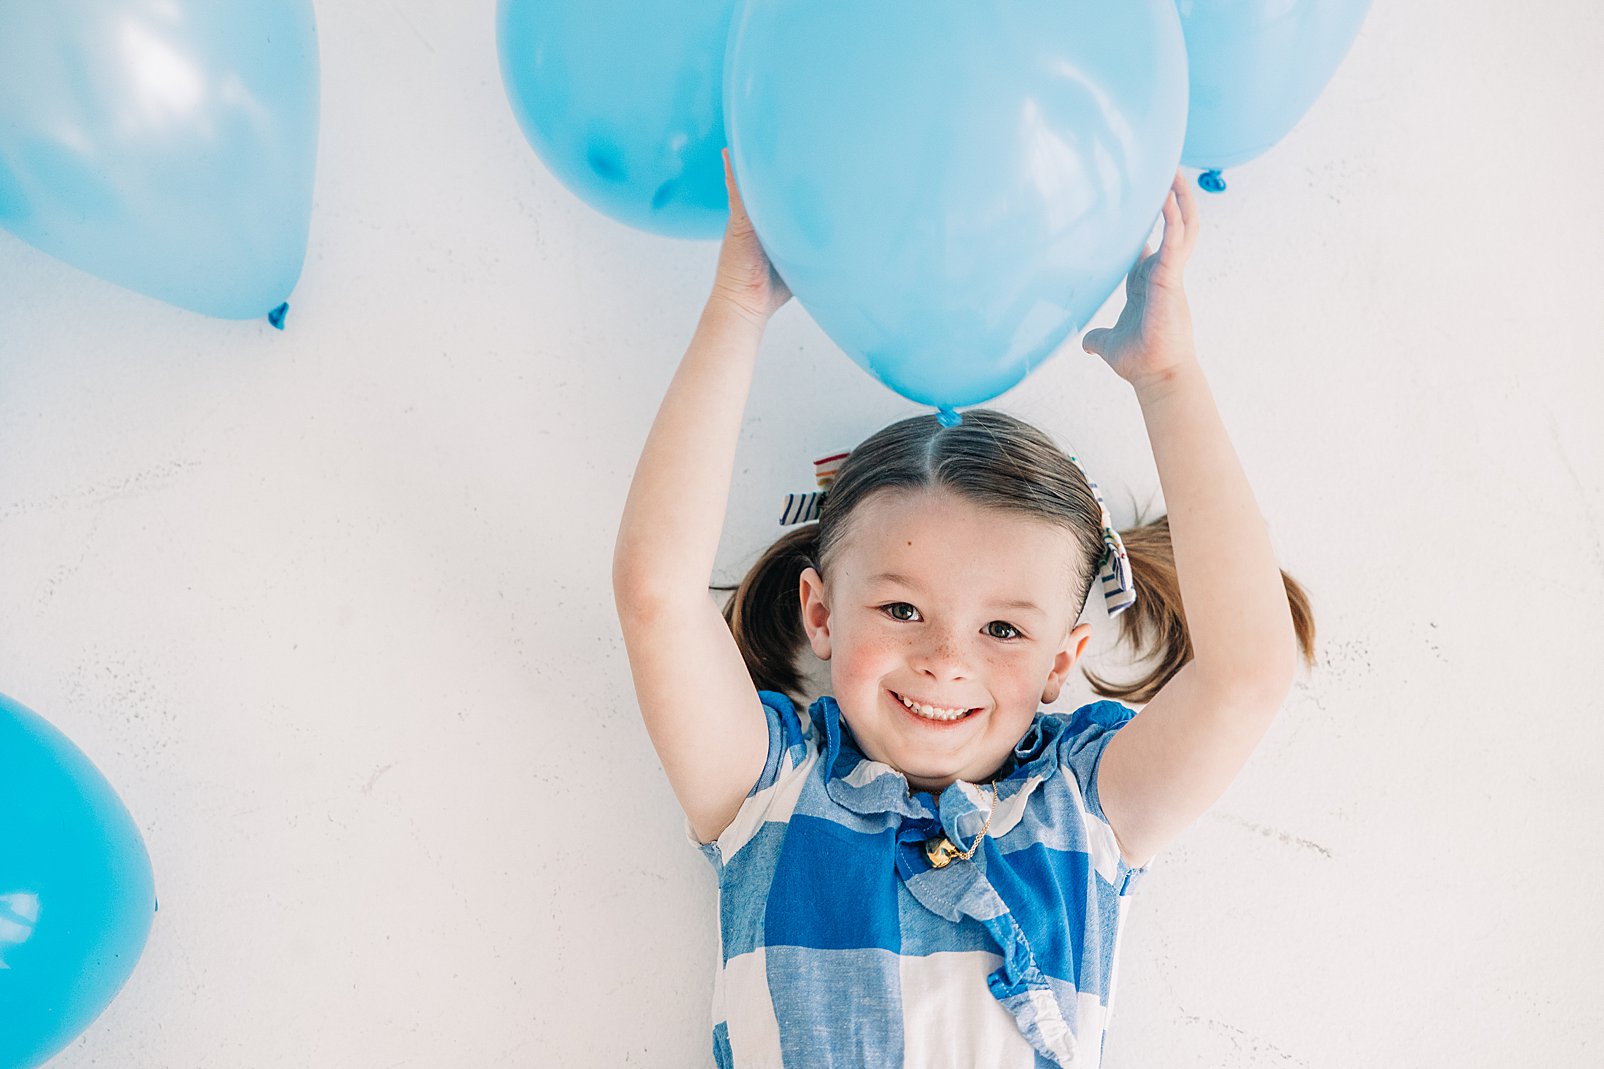 girl in blue birthday dress with blue balloons